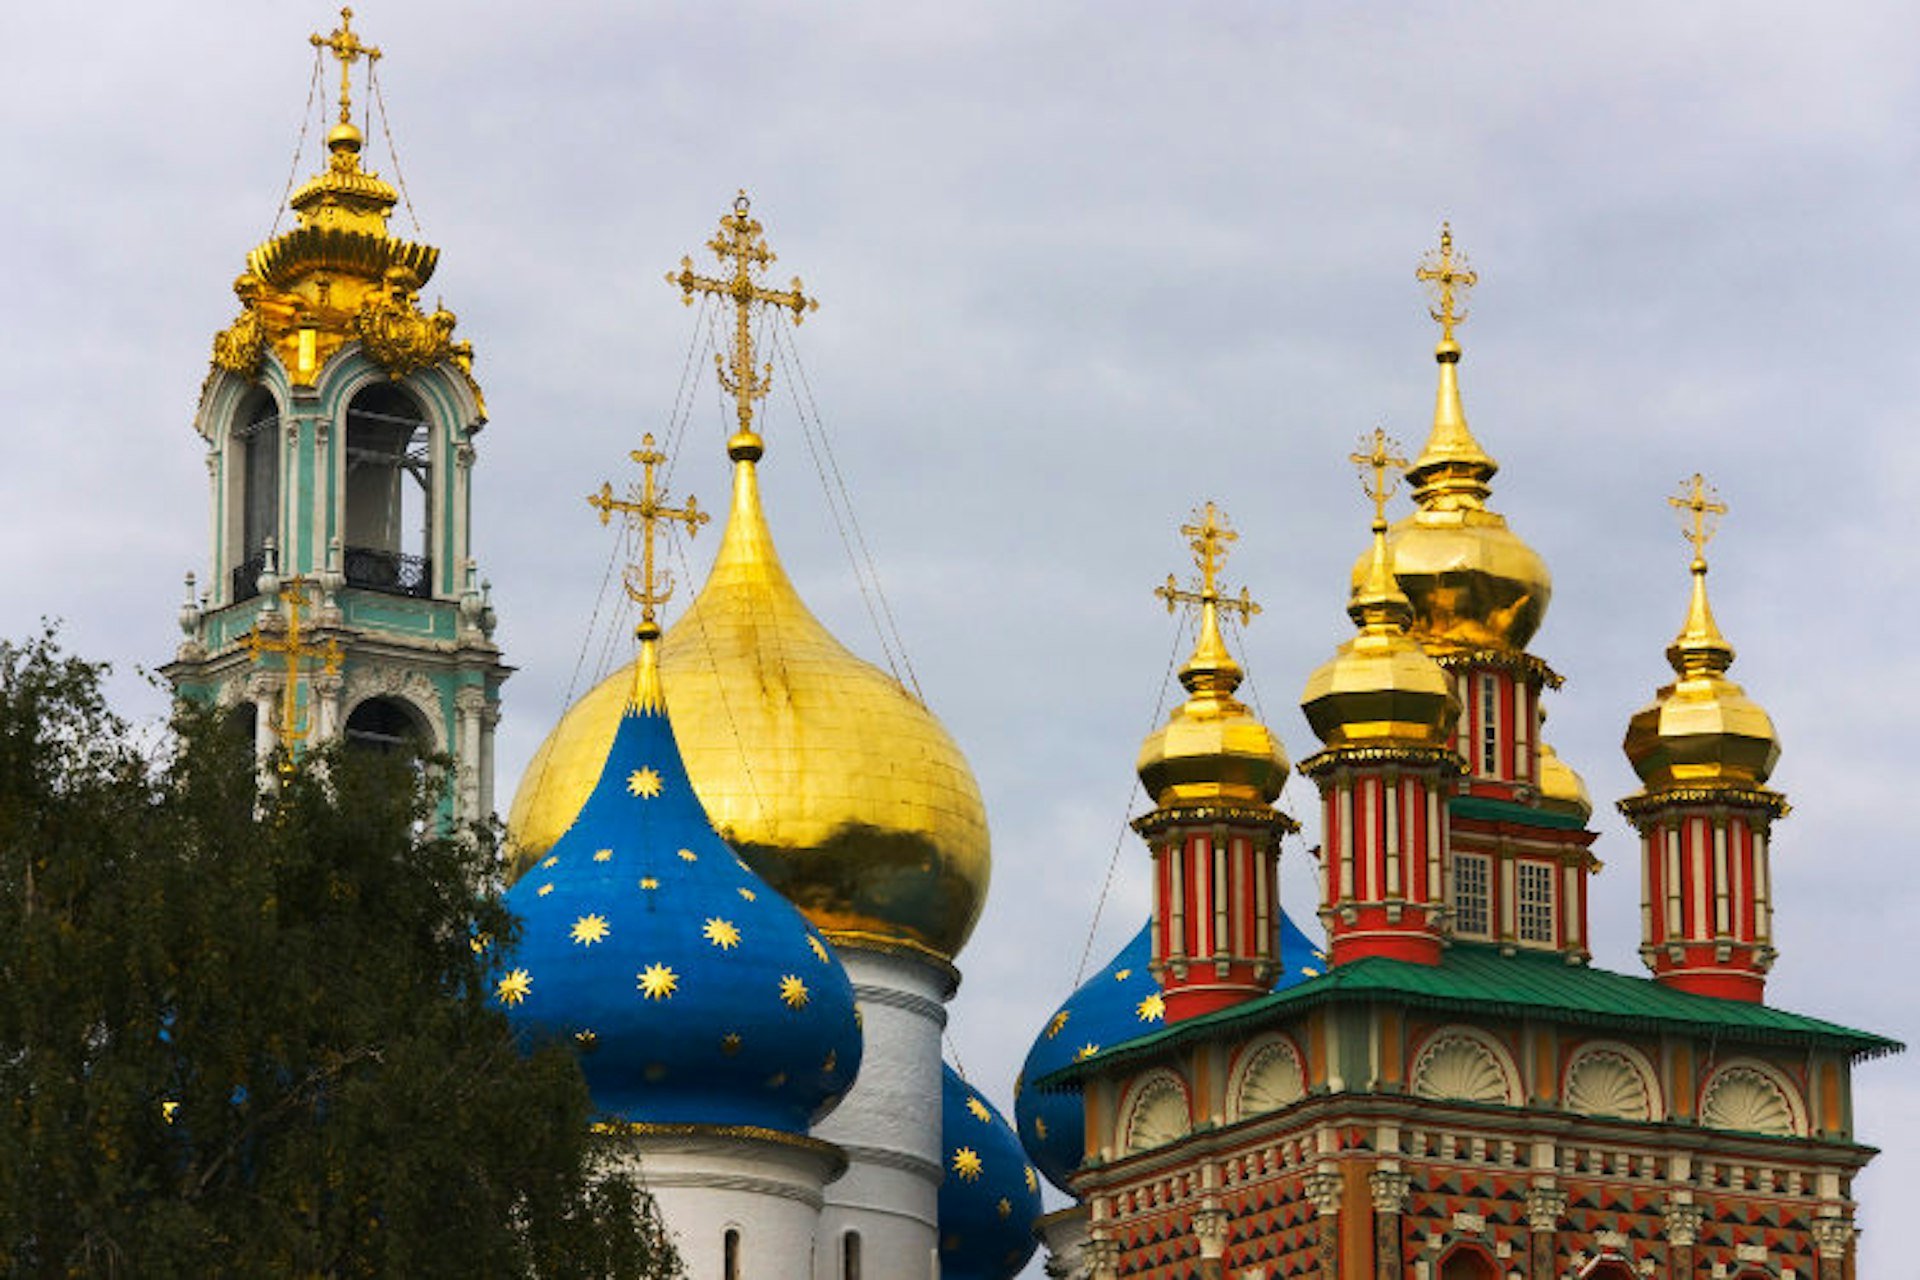 Sergiev Posad's Trinity Monastery of St Sergius. Image by Keren Su / Lonely Planet Images / Getty Images